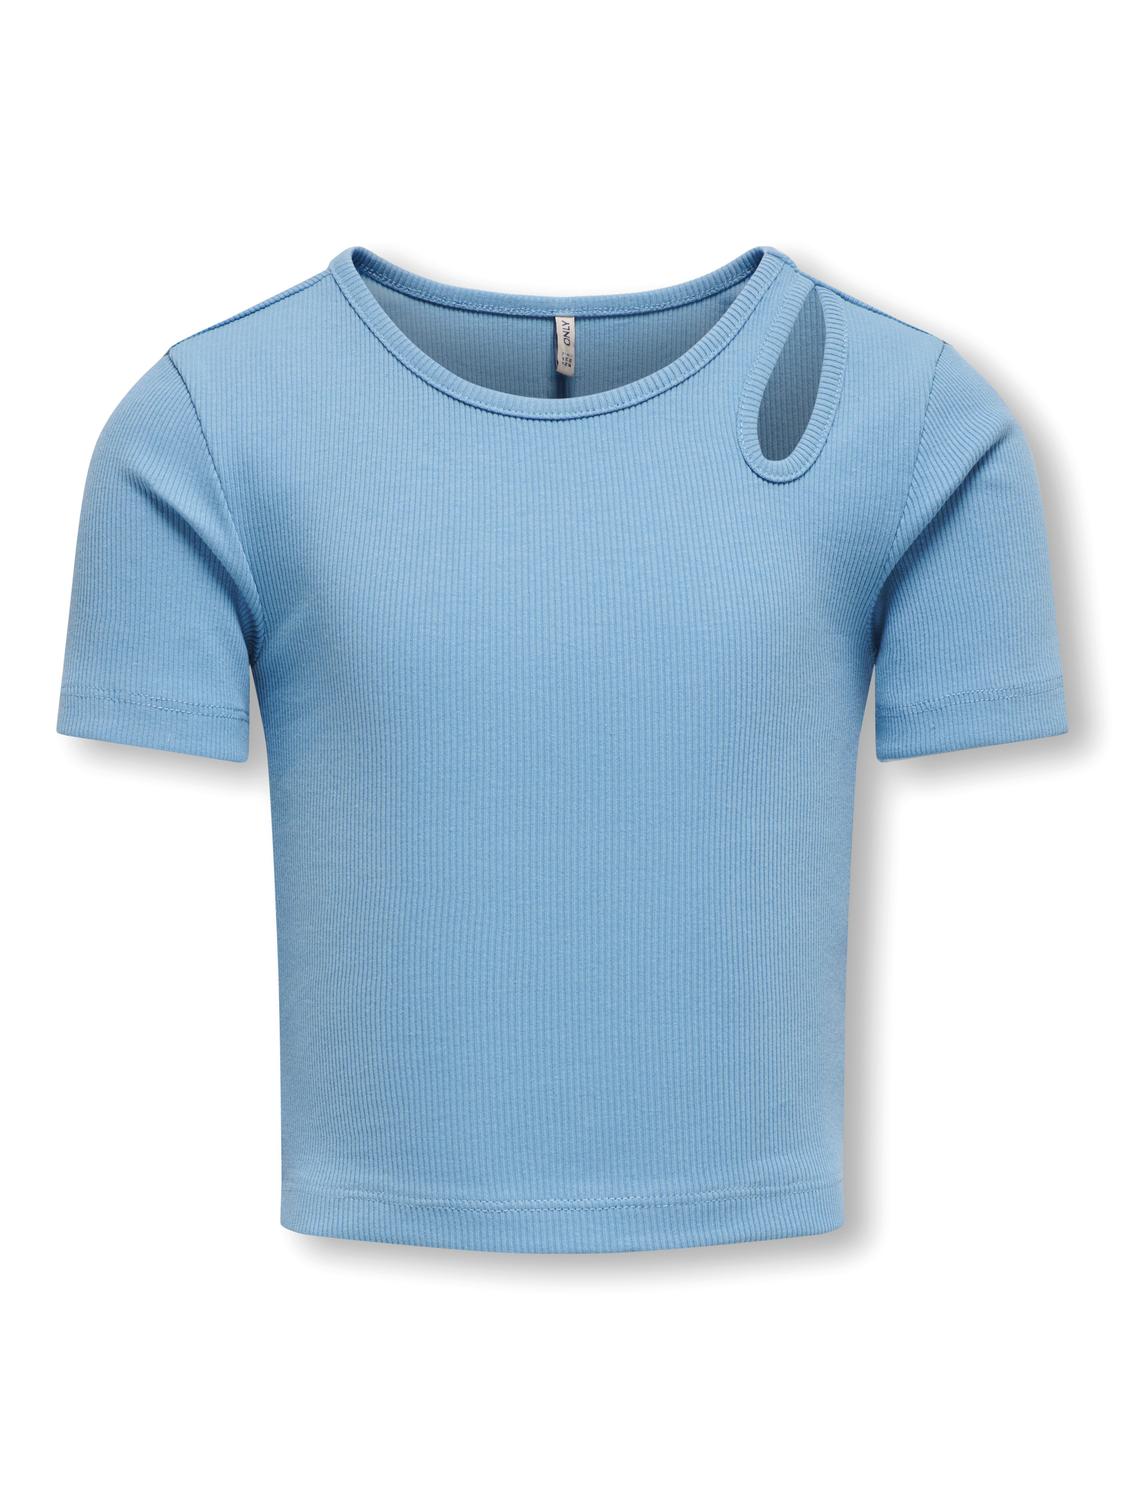 ONLY Top Tight Fit Paricollo -Blissful Blue - 15313690